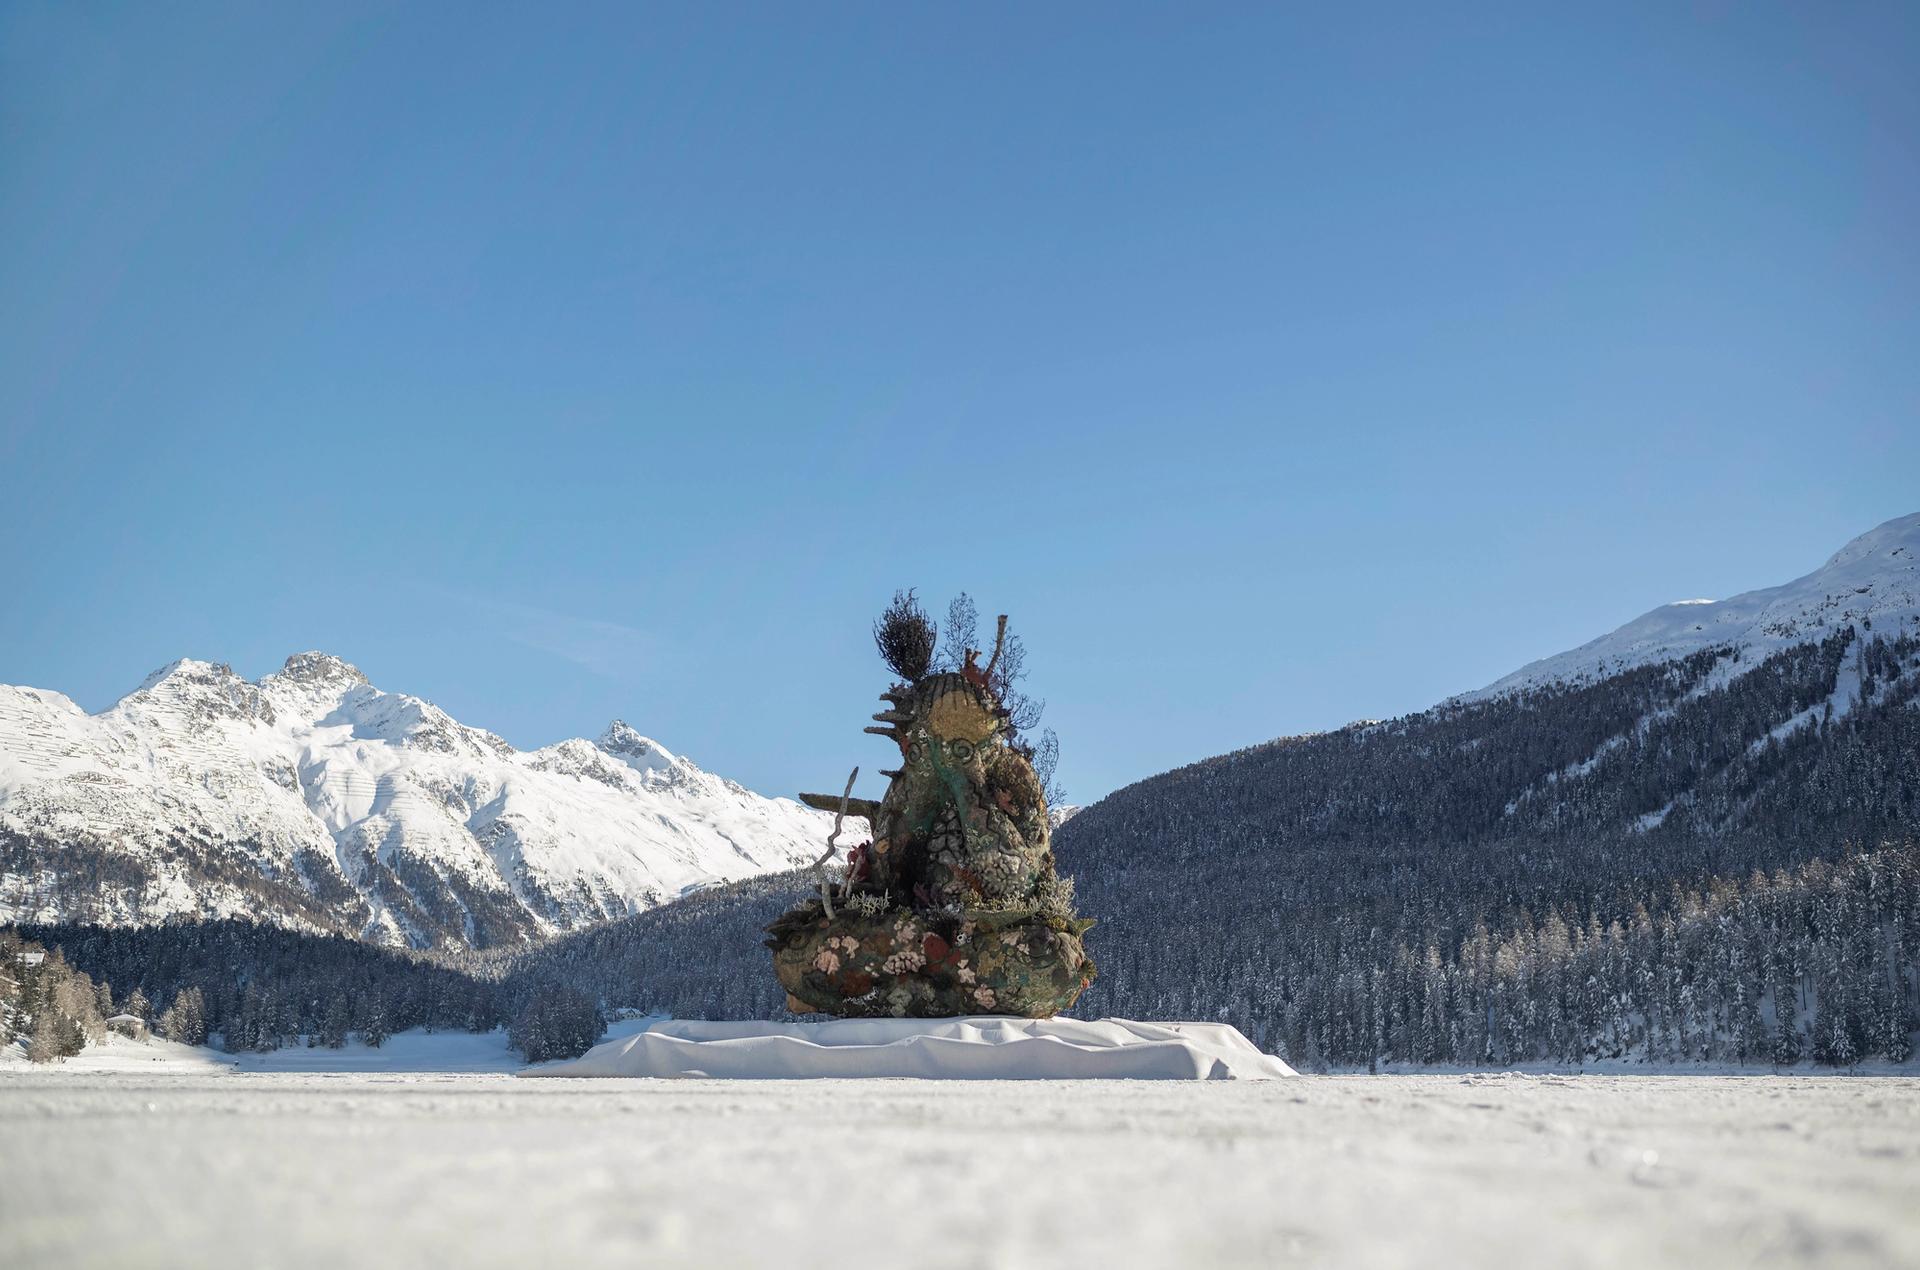 Damien Hirst's The Monk (2014) installed on Lake St. Moritz Photo: Felix Friedmann. © Damien Hirst and Science Ltd. All rights reserved, DACS 2020